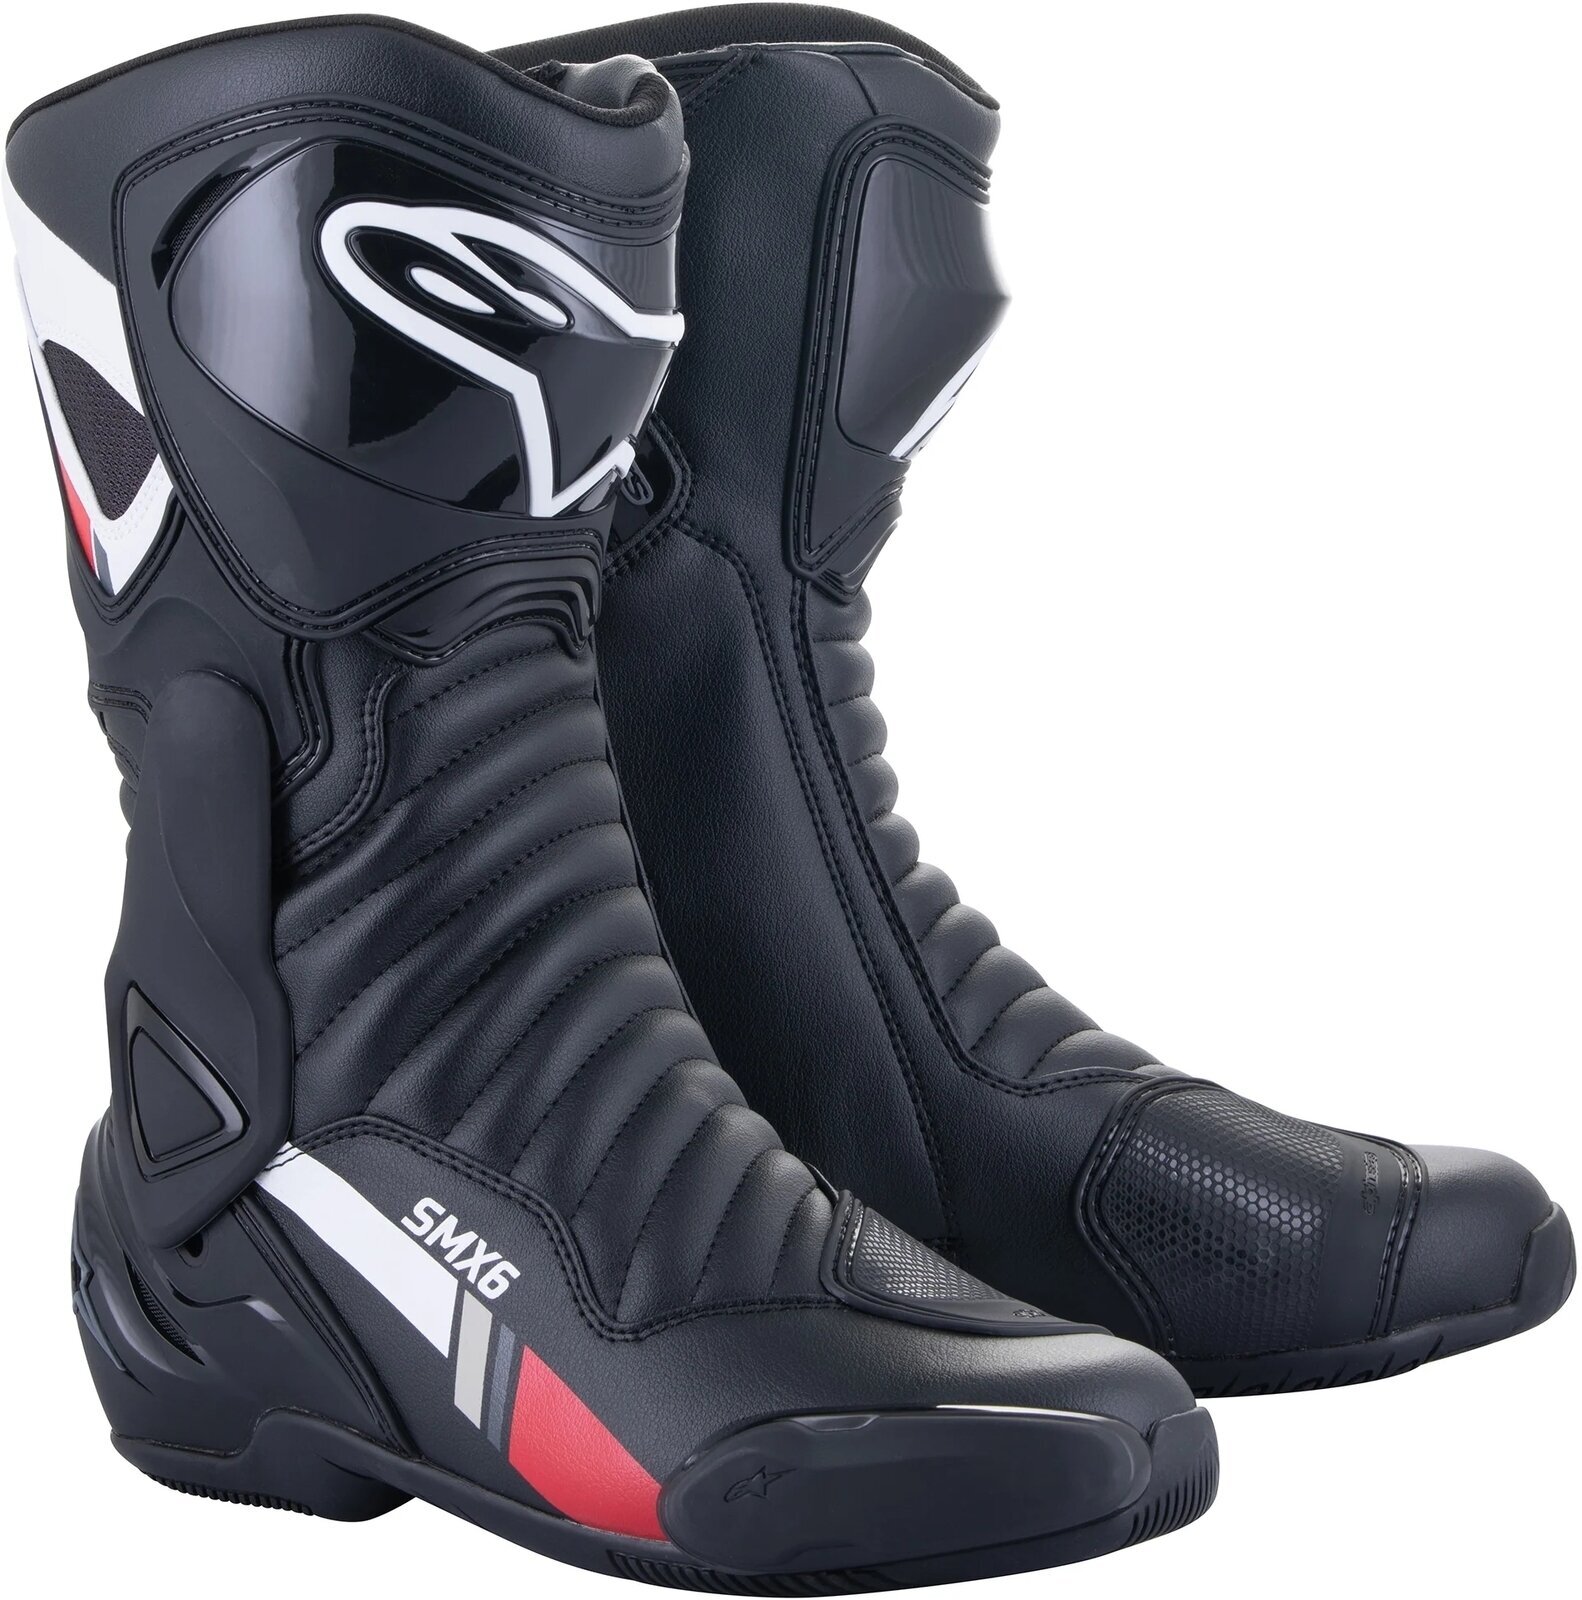 Motorcycle Boots Alpinestars SMX-6 V2 Boots Black/White/Gray 49 Motorcycle Boots